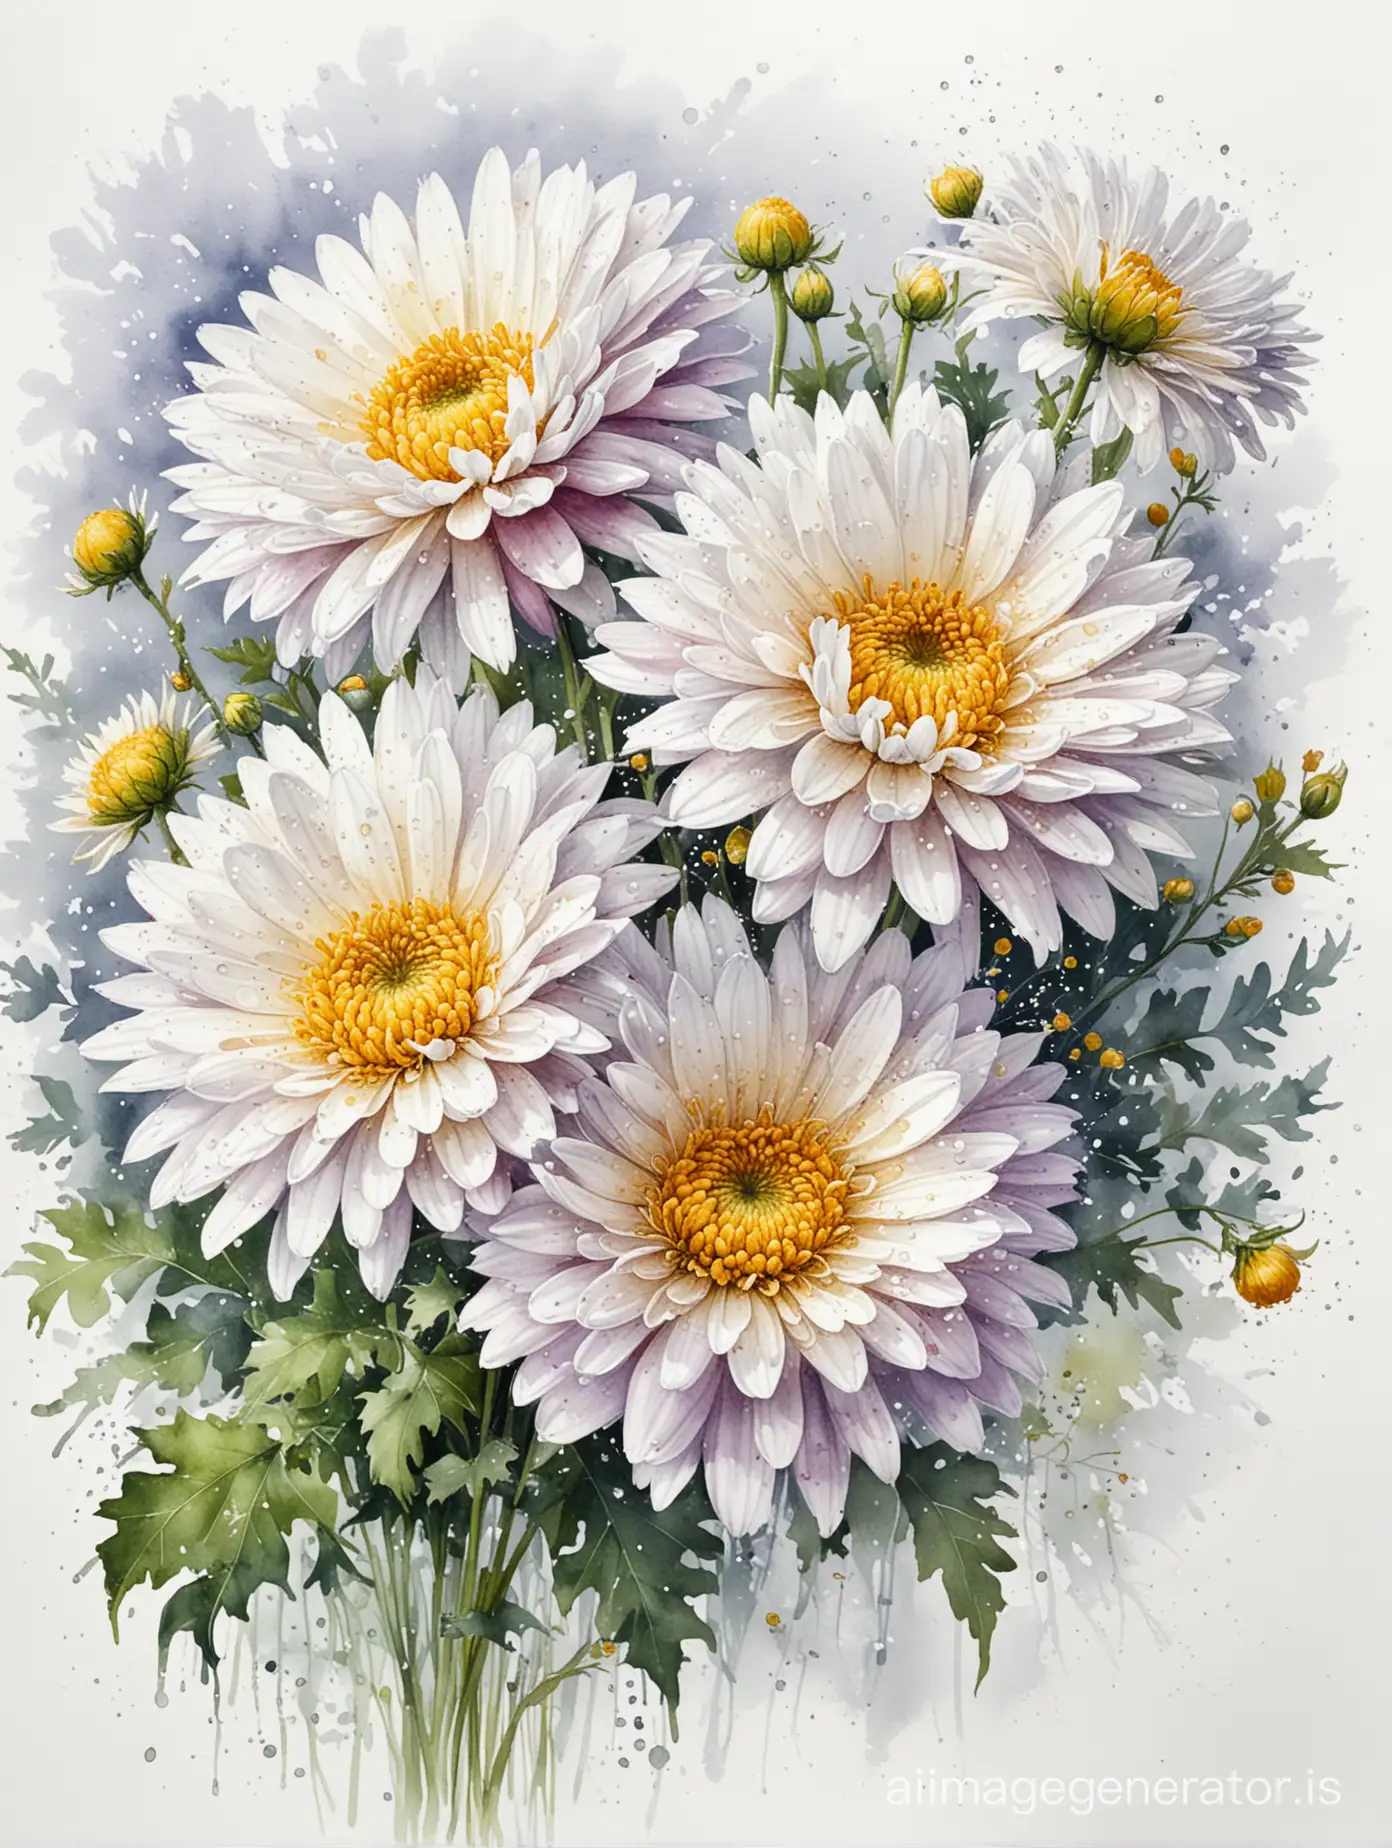 Chrysanthemum-Bouquet-with-Dew-Drops-on-White-Watercolor-Background